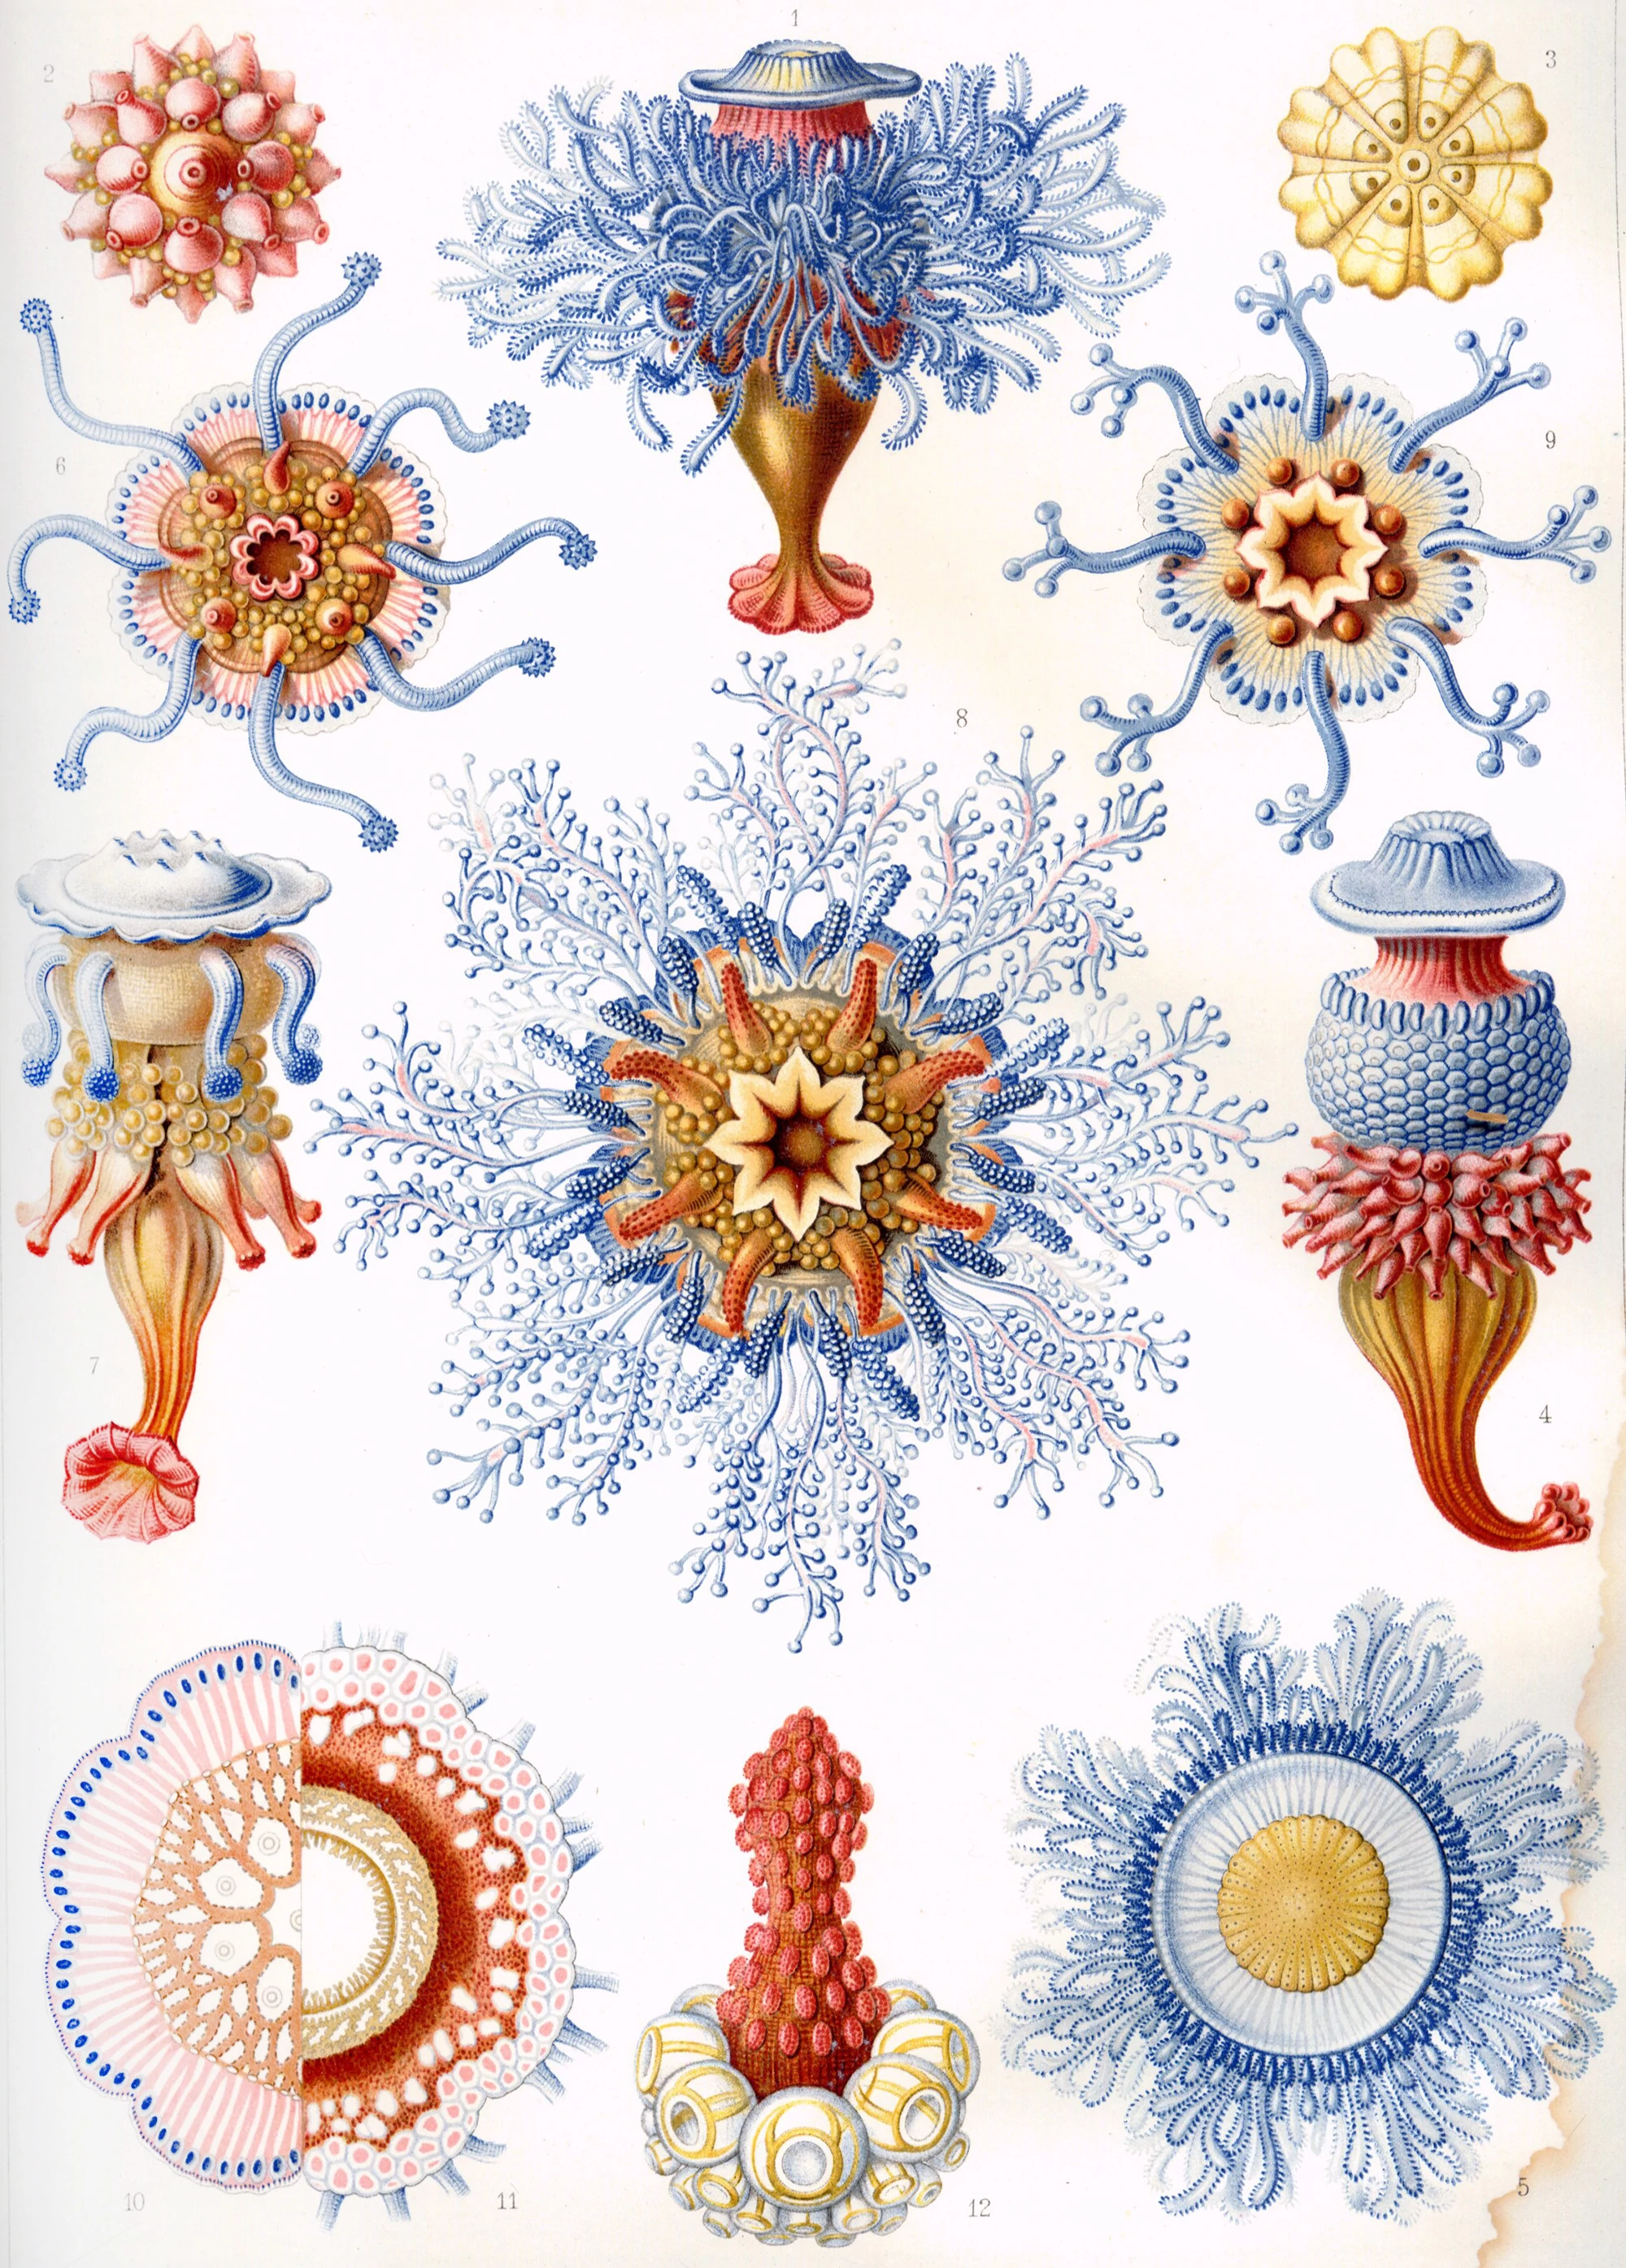 Art Forms in Nature, Plate 17: Siphonophorae, Ernst Haeckel